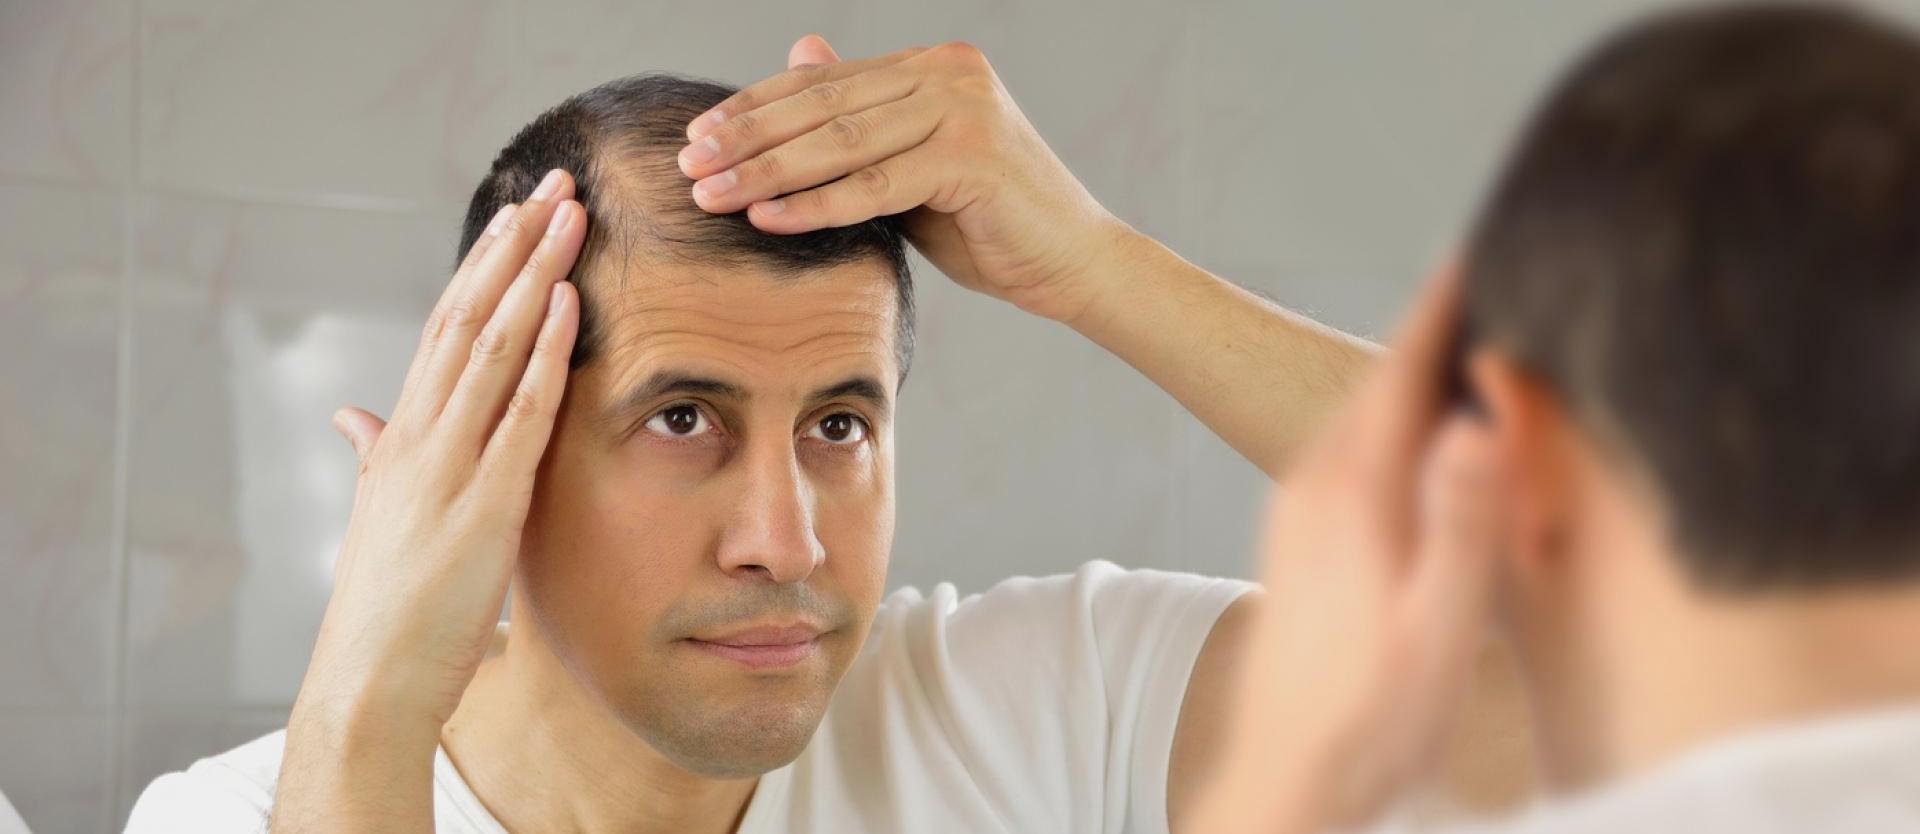 Can Applying Oil to Your Scalp Lead to Hair Loss?